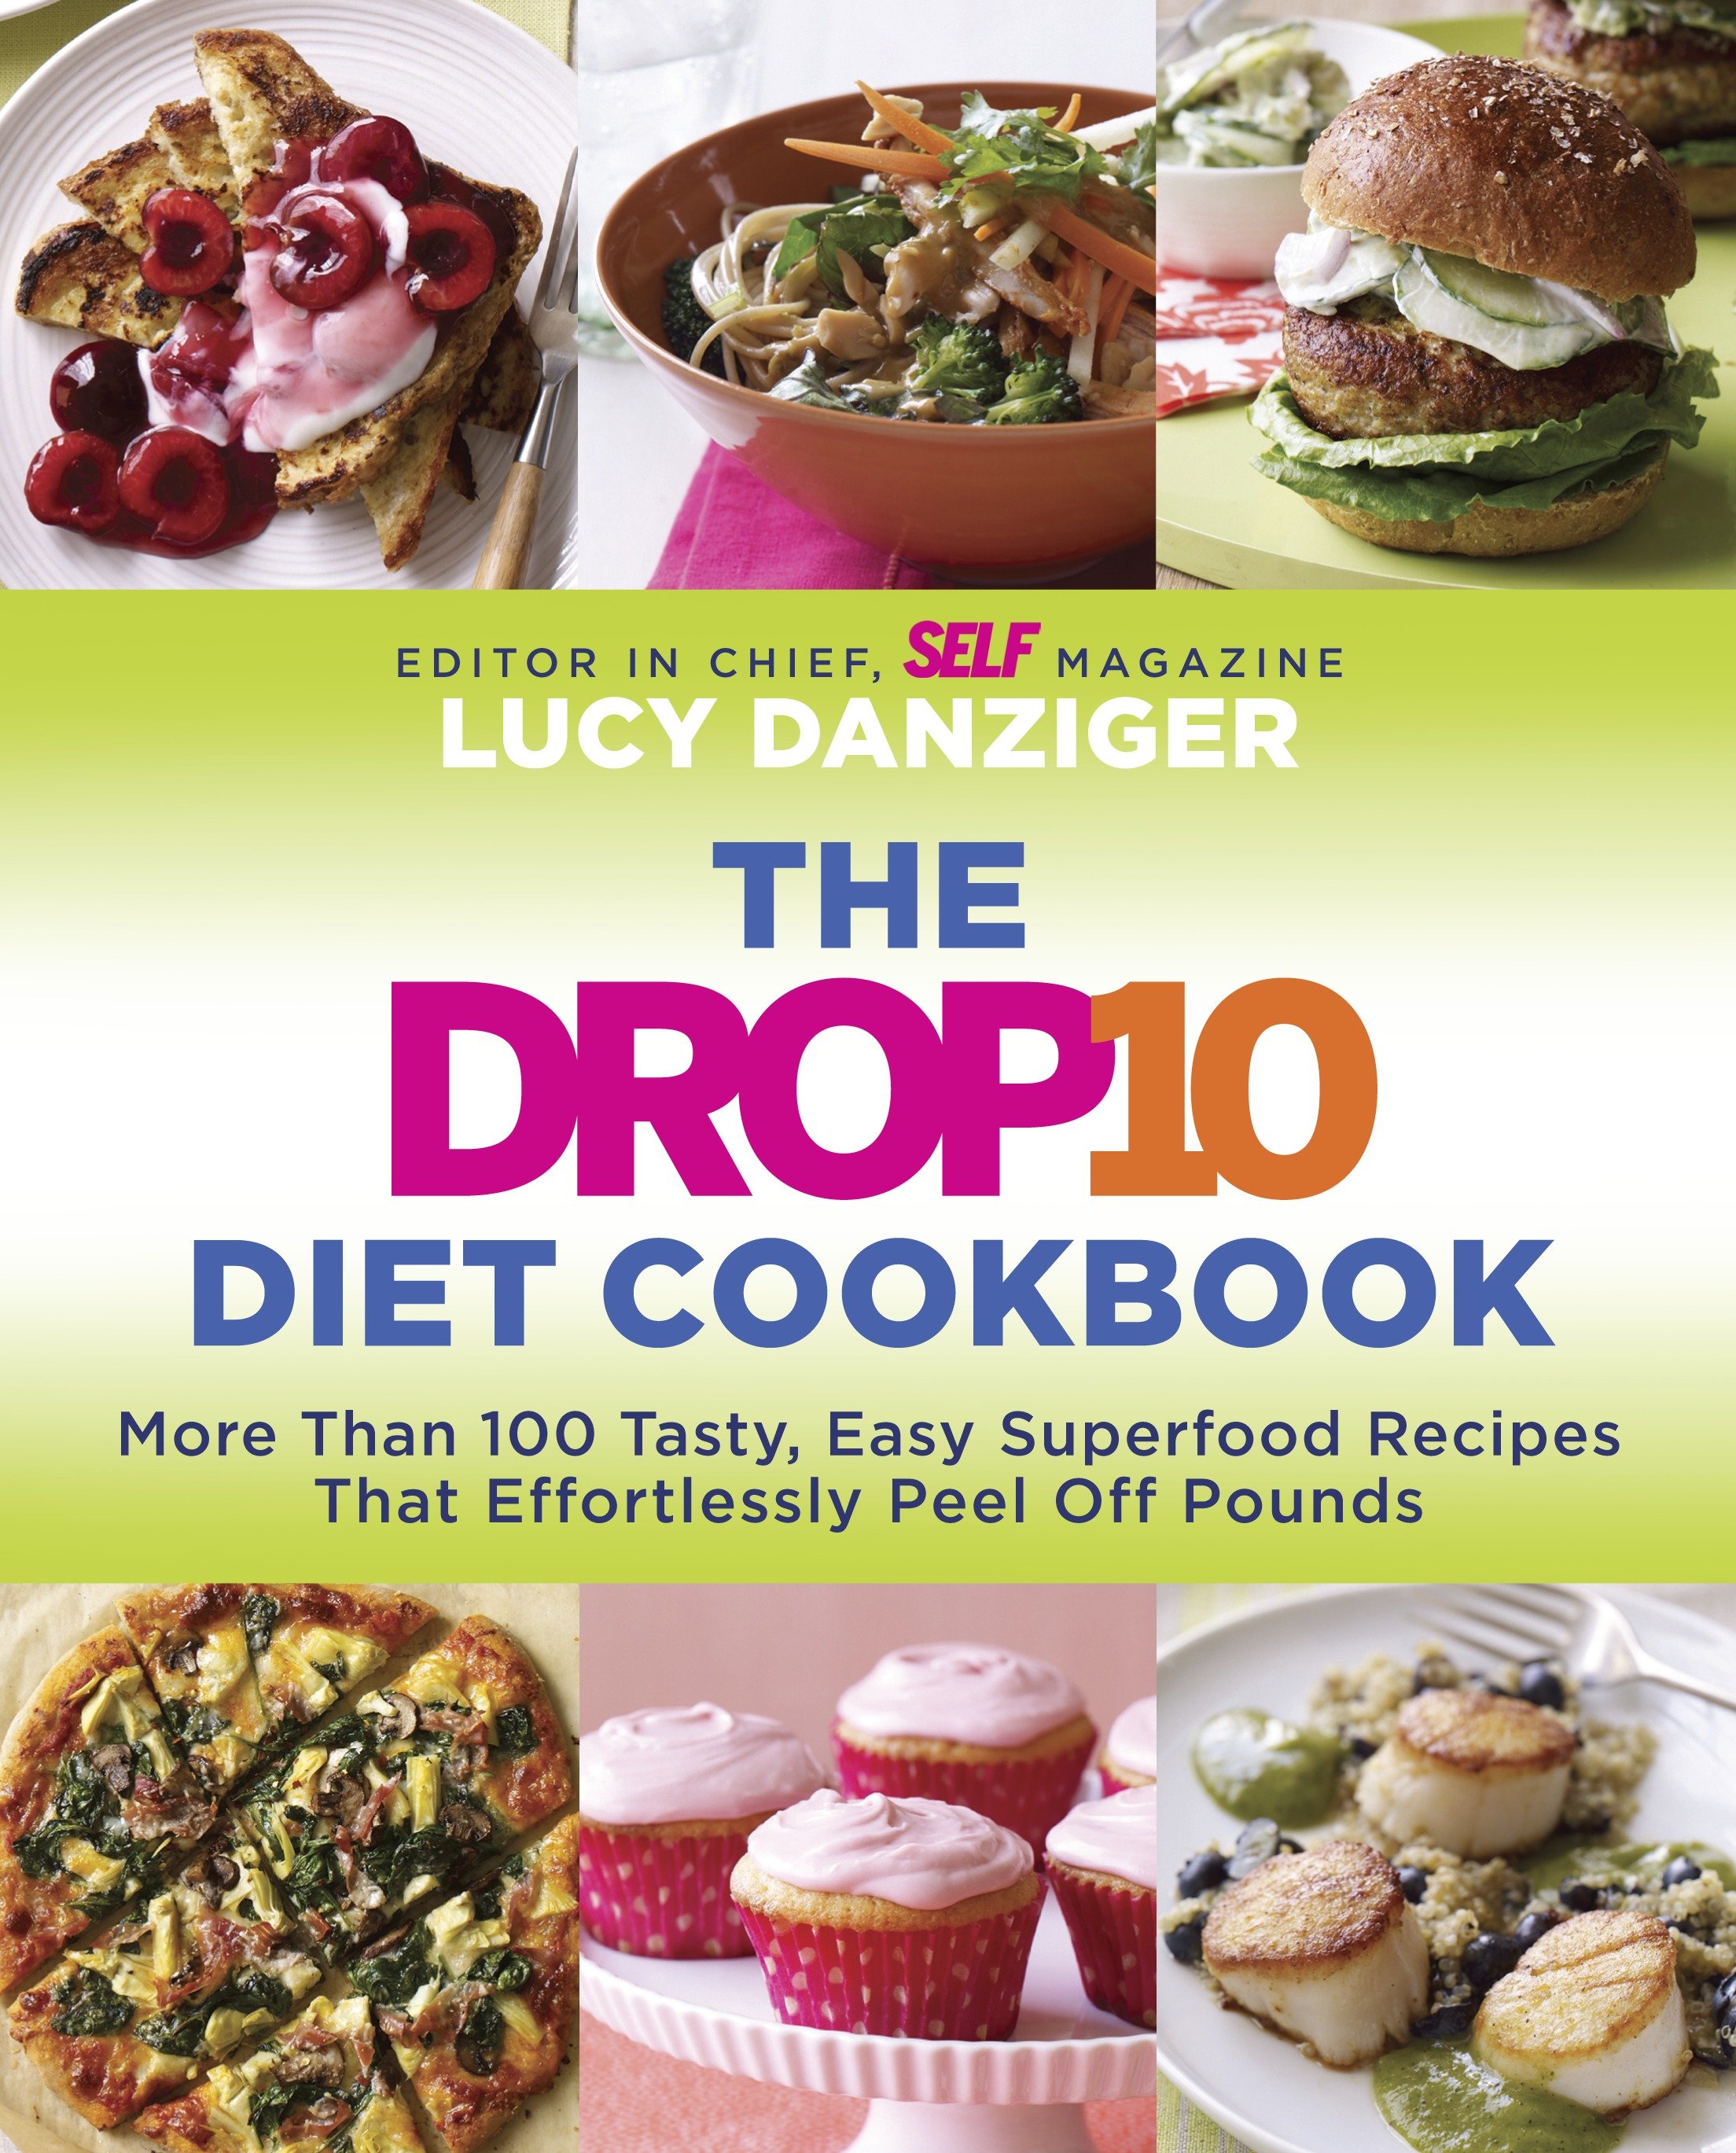 The drop 10 diet cookbook more than 100 tasty, easy superfood recipes that effortlessly peel off pounds cover image